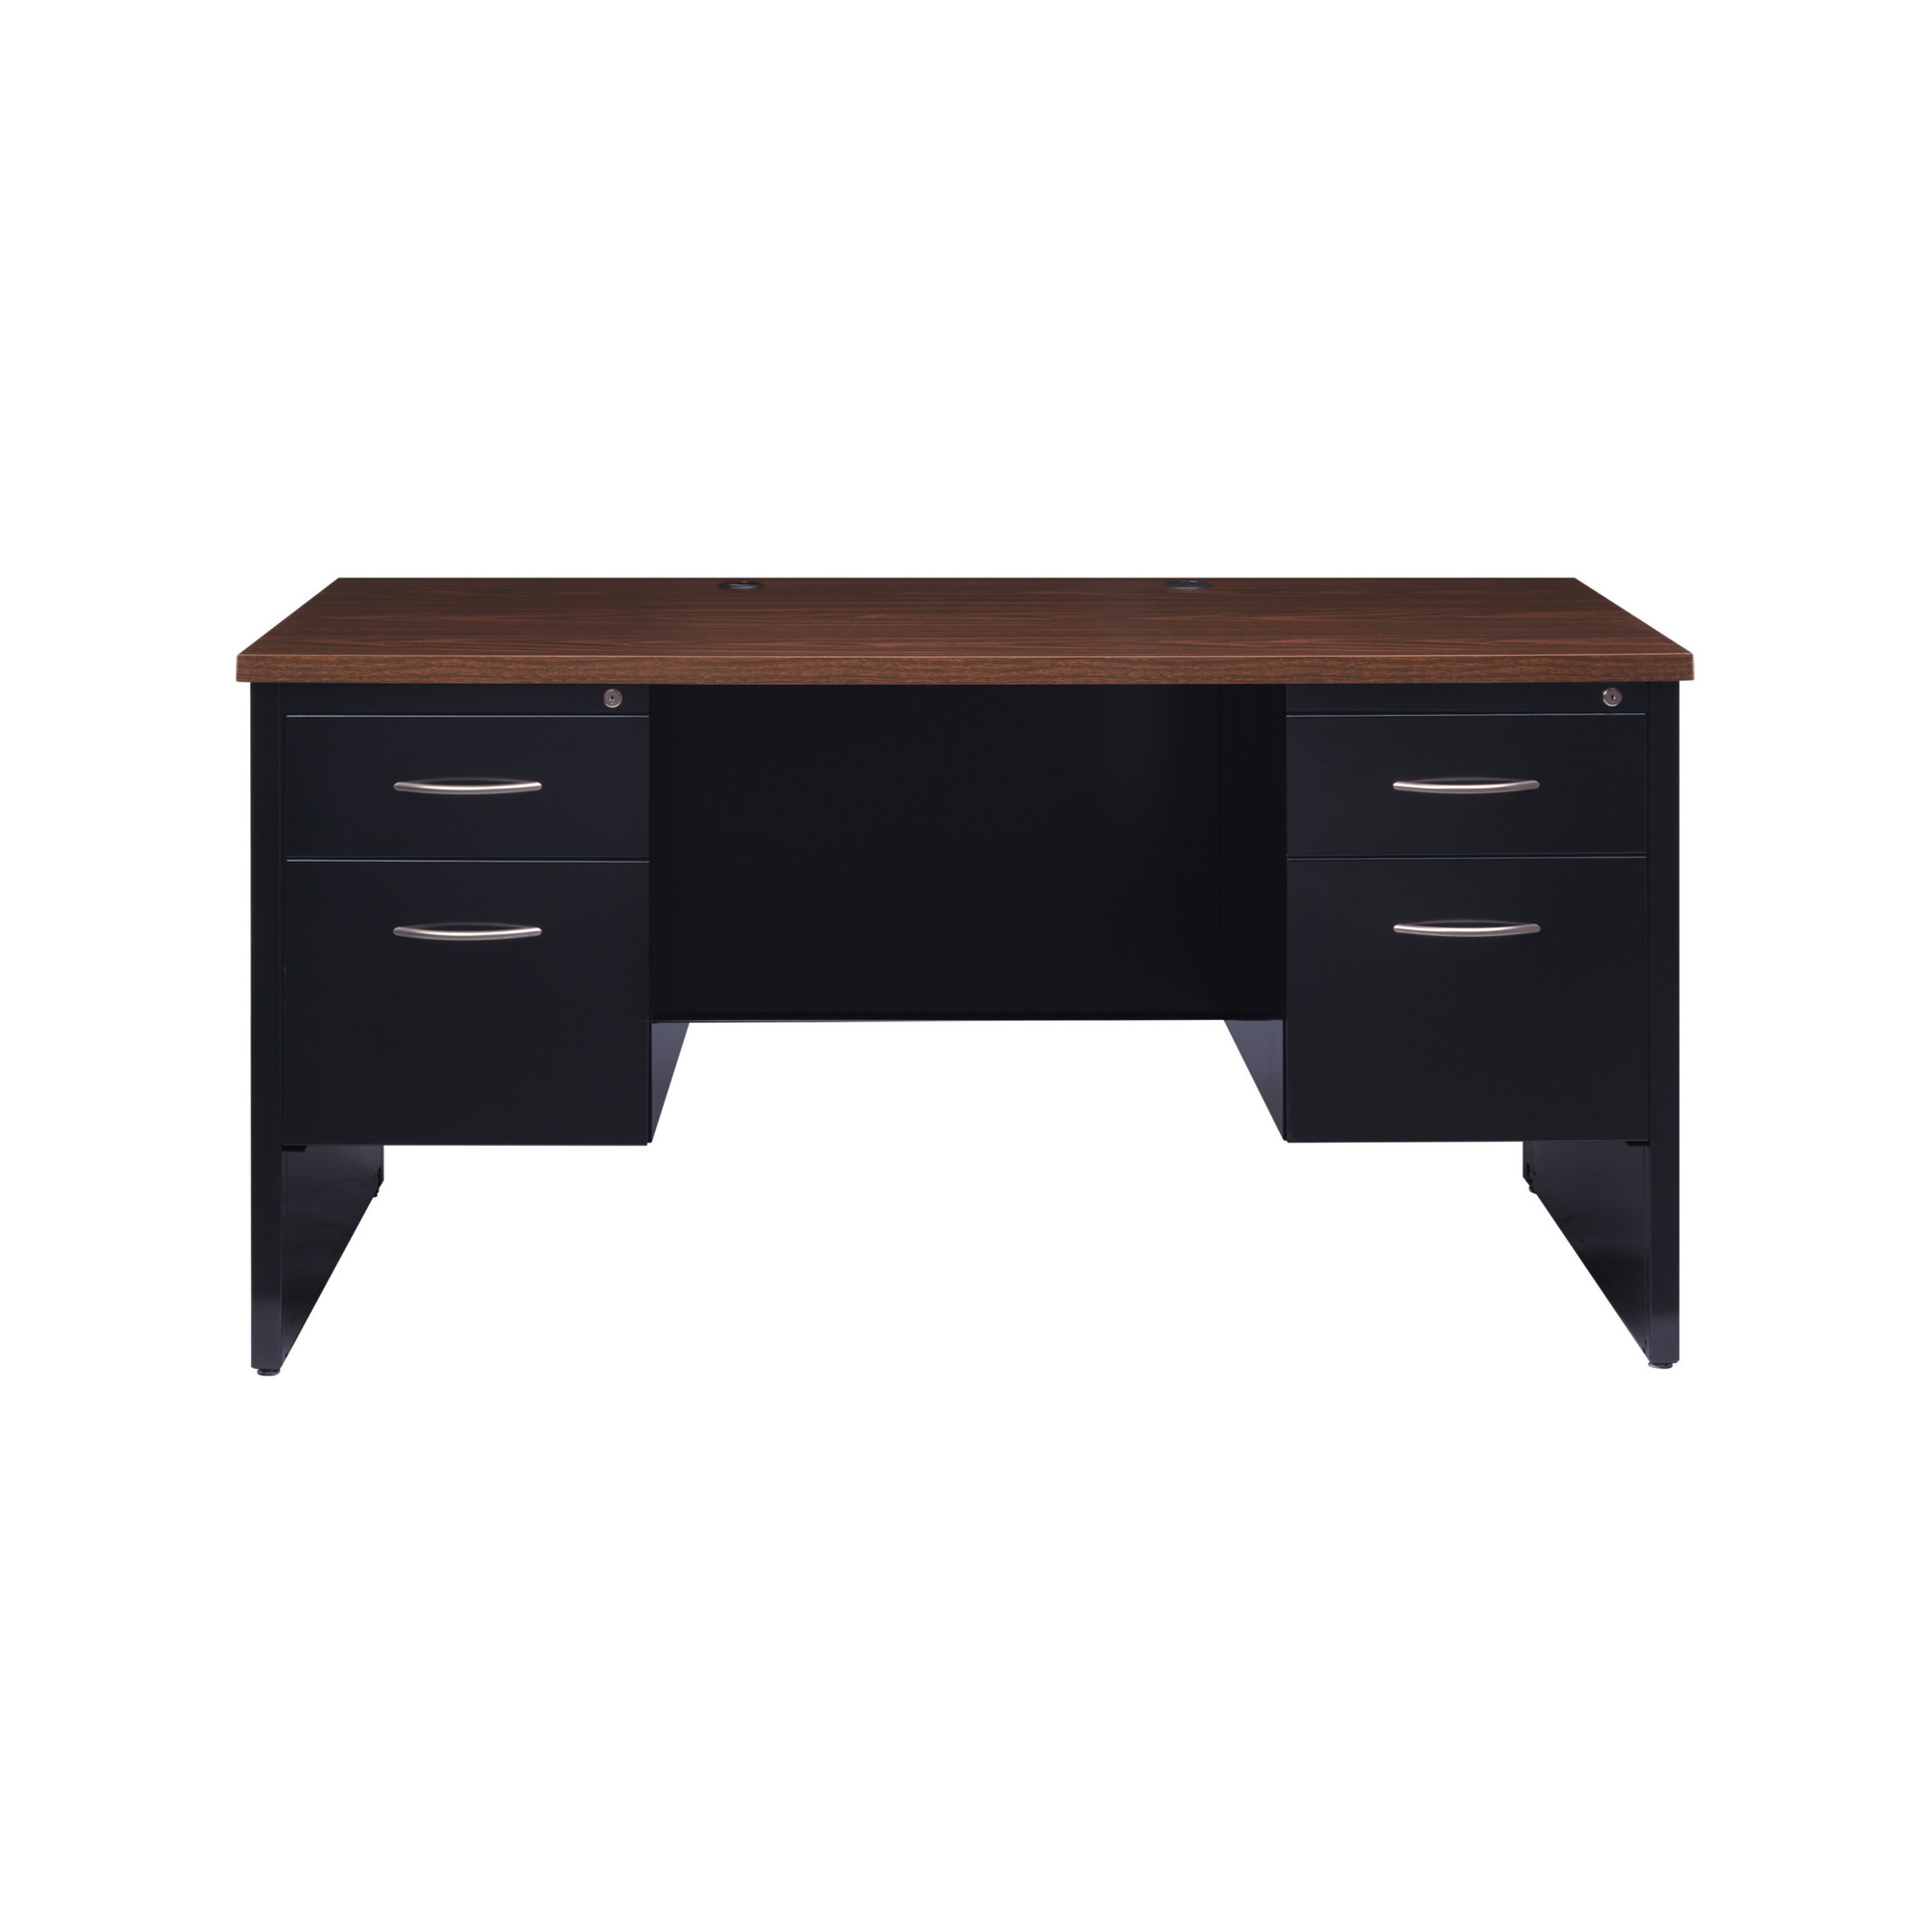 Hirsh Industries, Executive Modular Double Ped File Office Desk, Width 60 in, Height 29.5 in, Depth 30 in, Model 20533